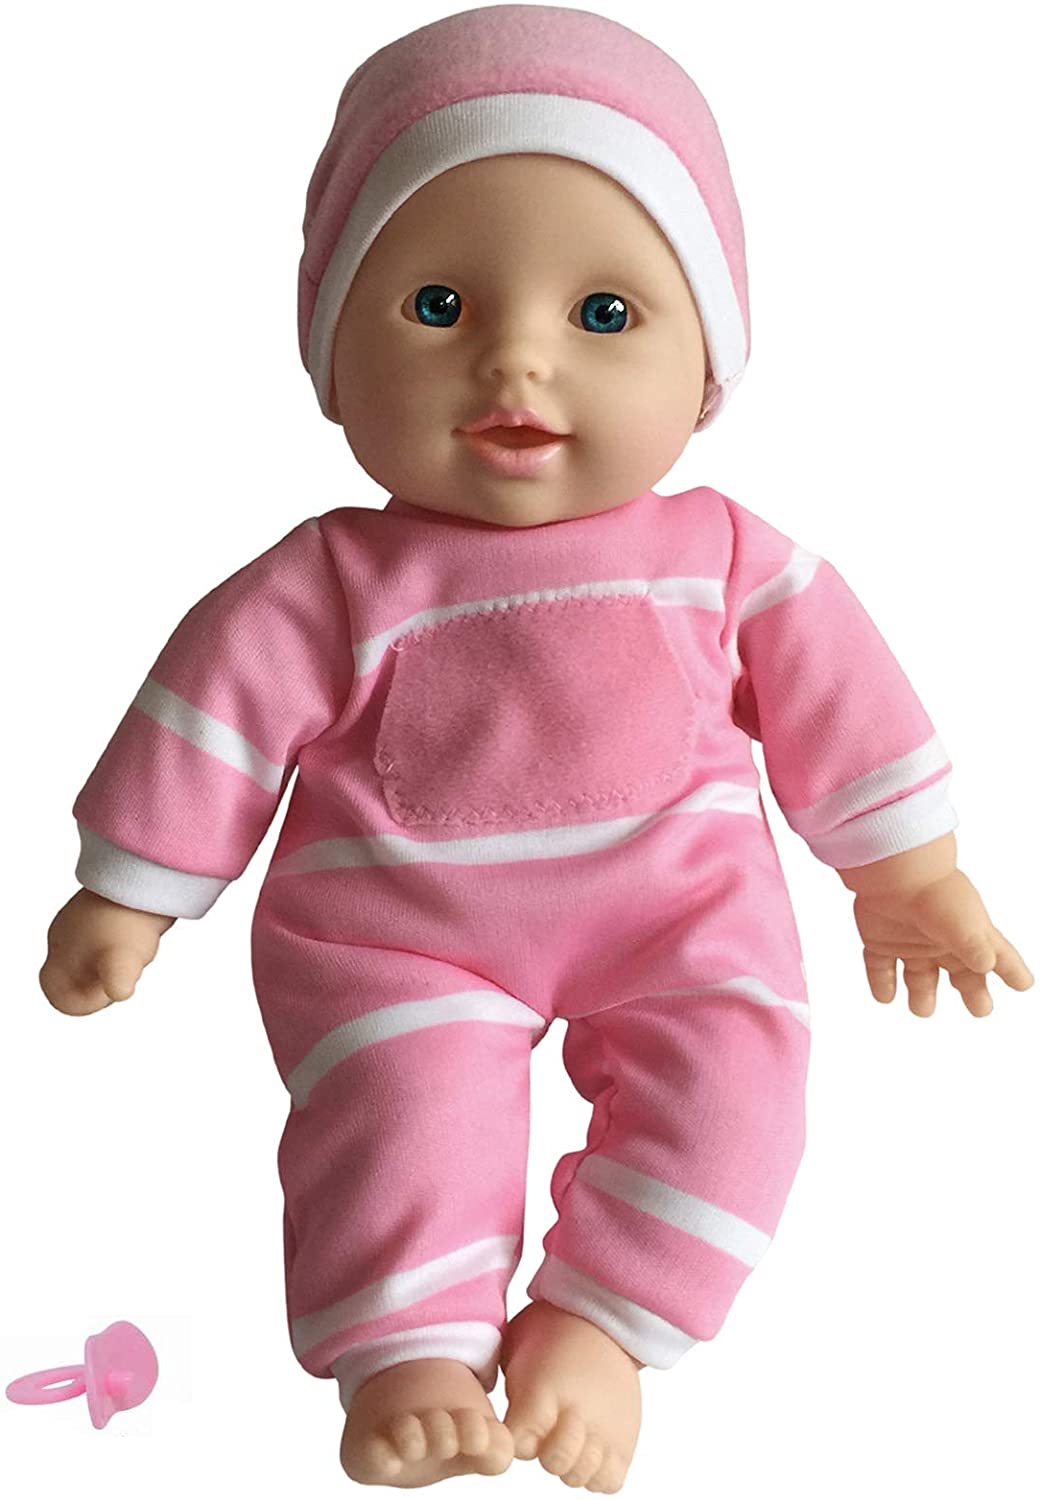 The New York Doll Collection Soft Body Baby Doll, 11-Inch